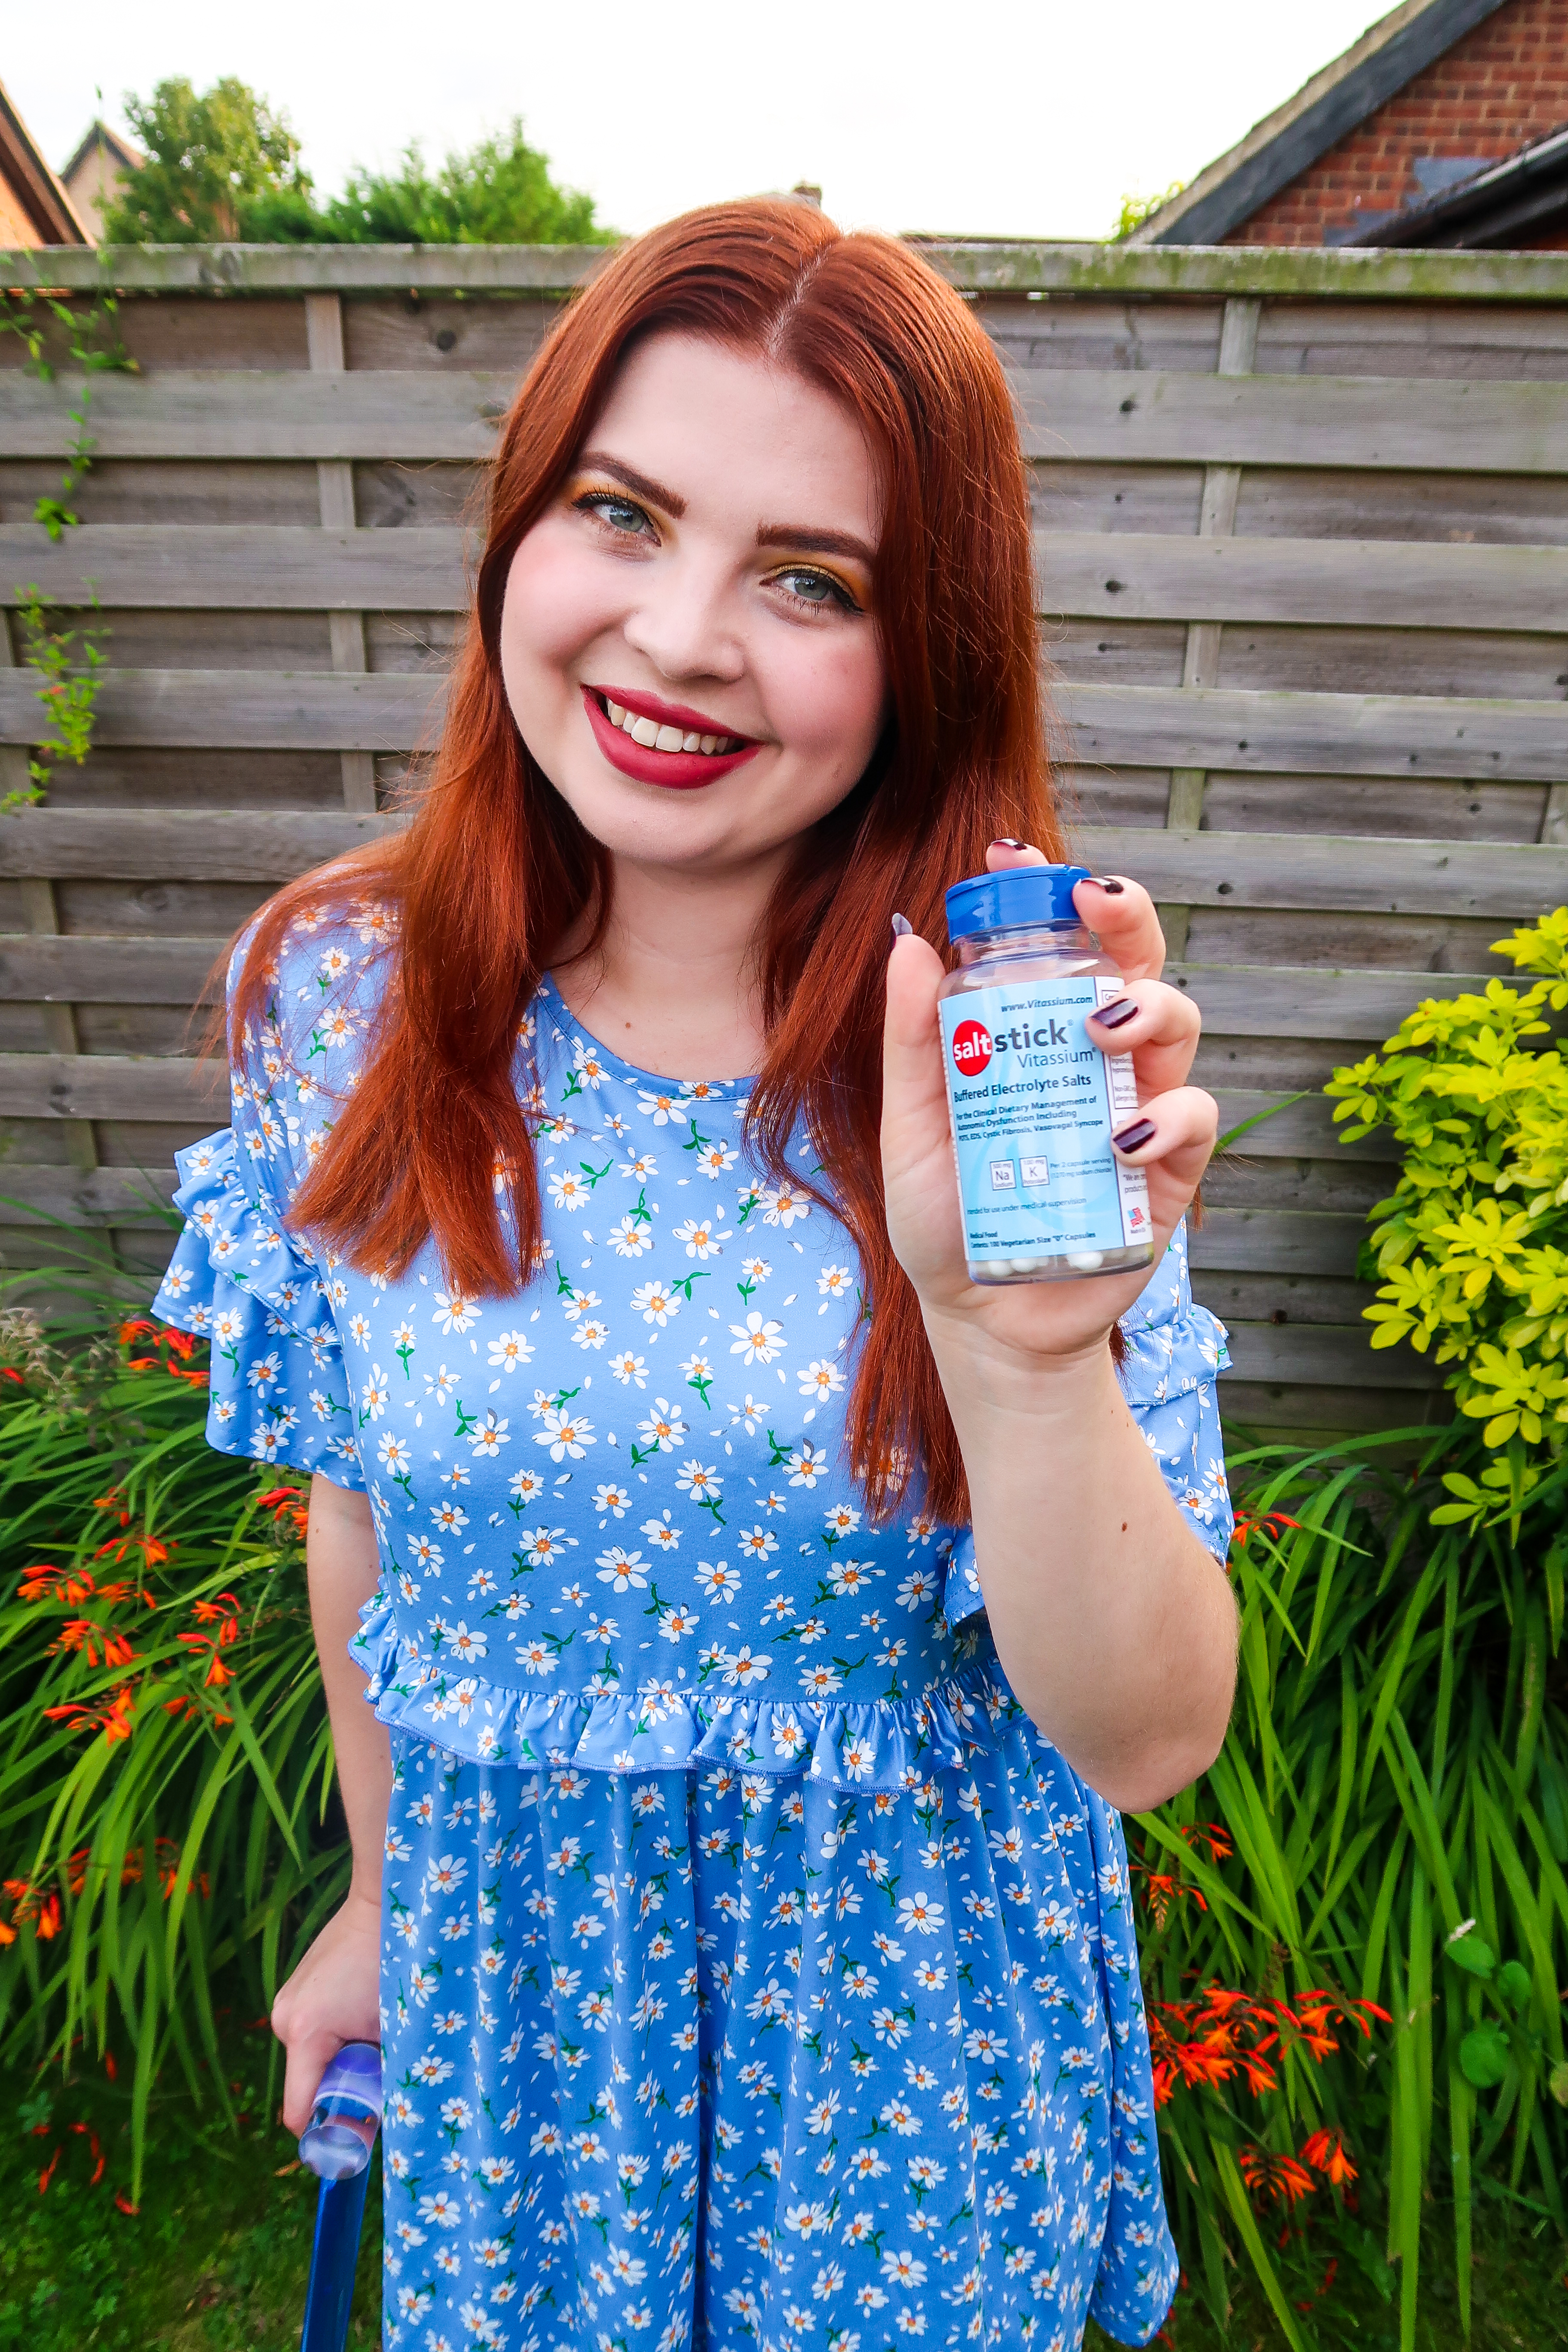 a midshot of Jenni a white woman with straight auburn hair is wearing a light blue dress with a small daisy pattern she is holding a bottle of vitassium a clear bottle with a dark blue top and pale blue label. she is using a blue walking stick and standing in a garden surrounded by plants.